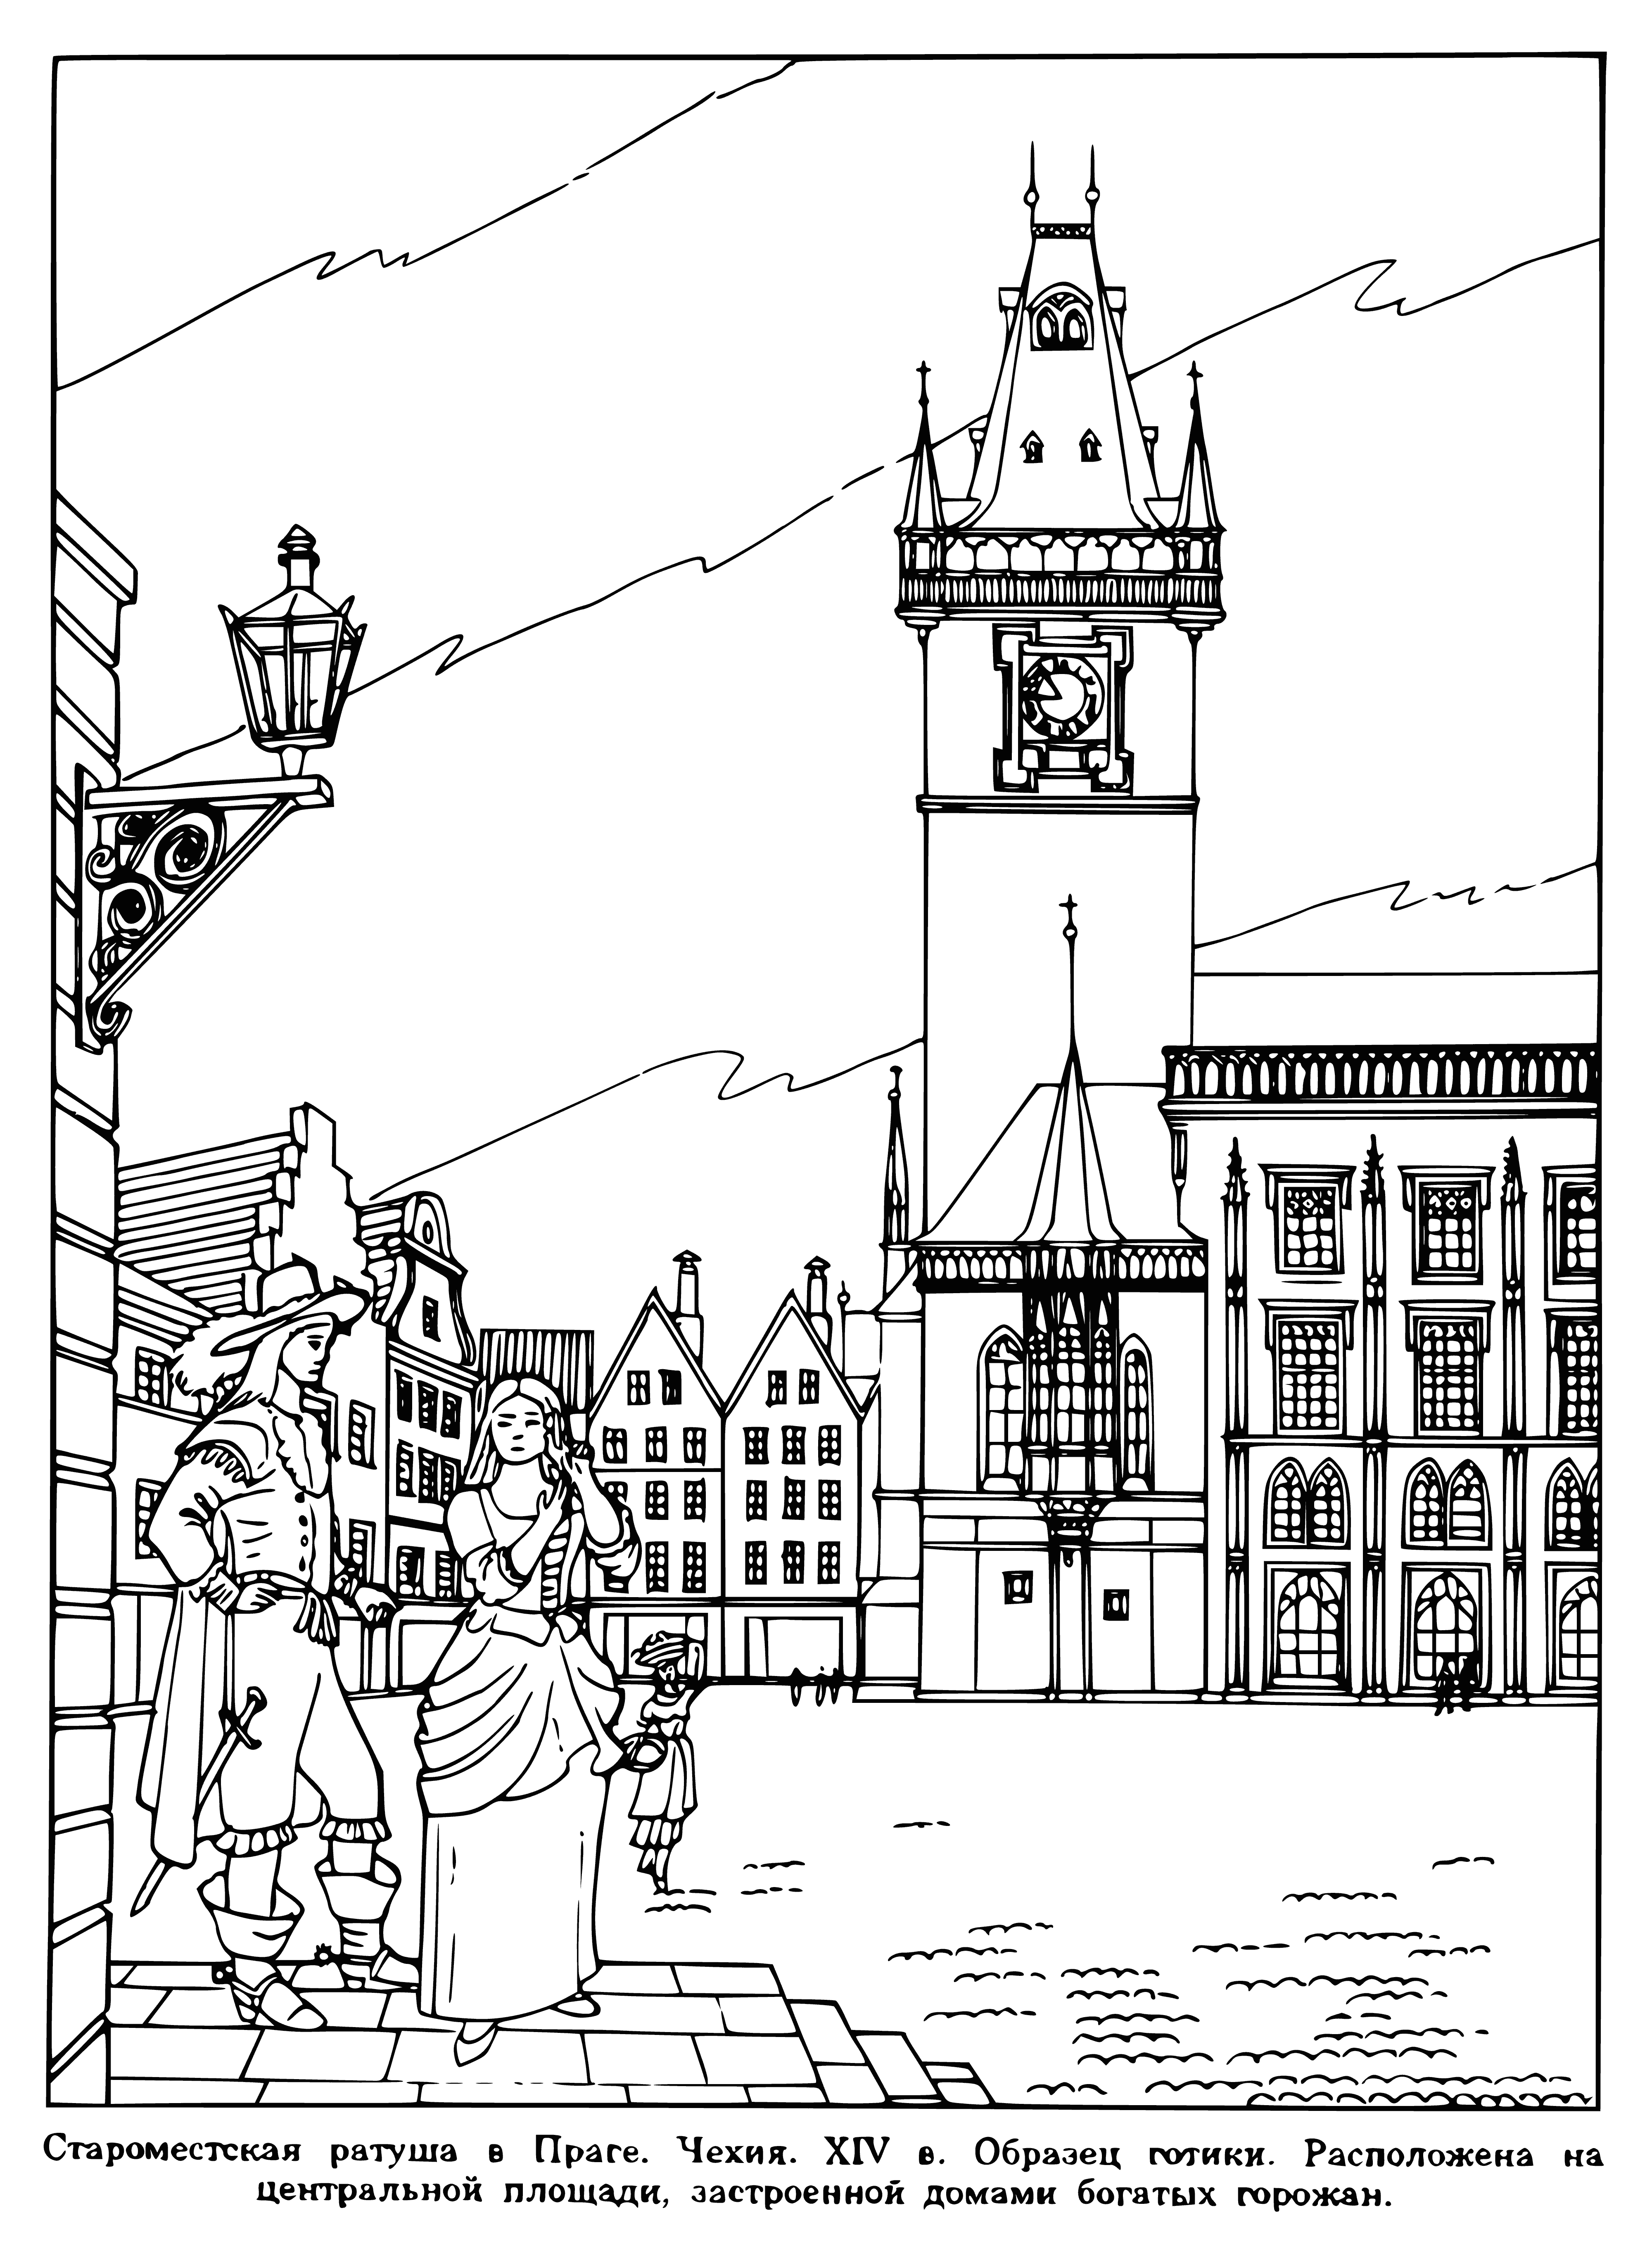 coloring page: Large stone building w/ clock tower, roof & decorated w/ statues. Square in front filled w/ people & fountain in center, carrying balloons & banners.